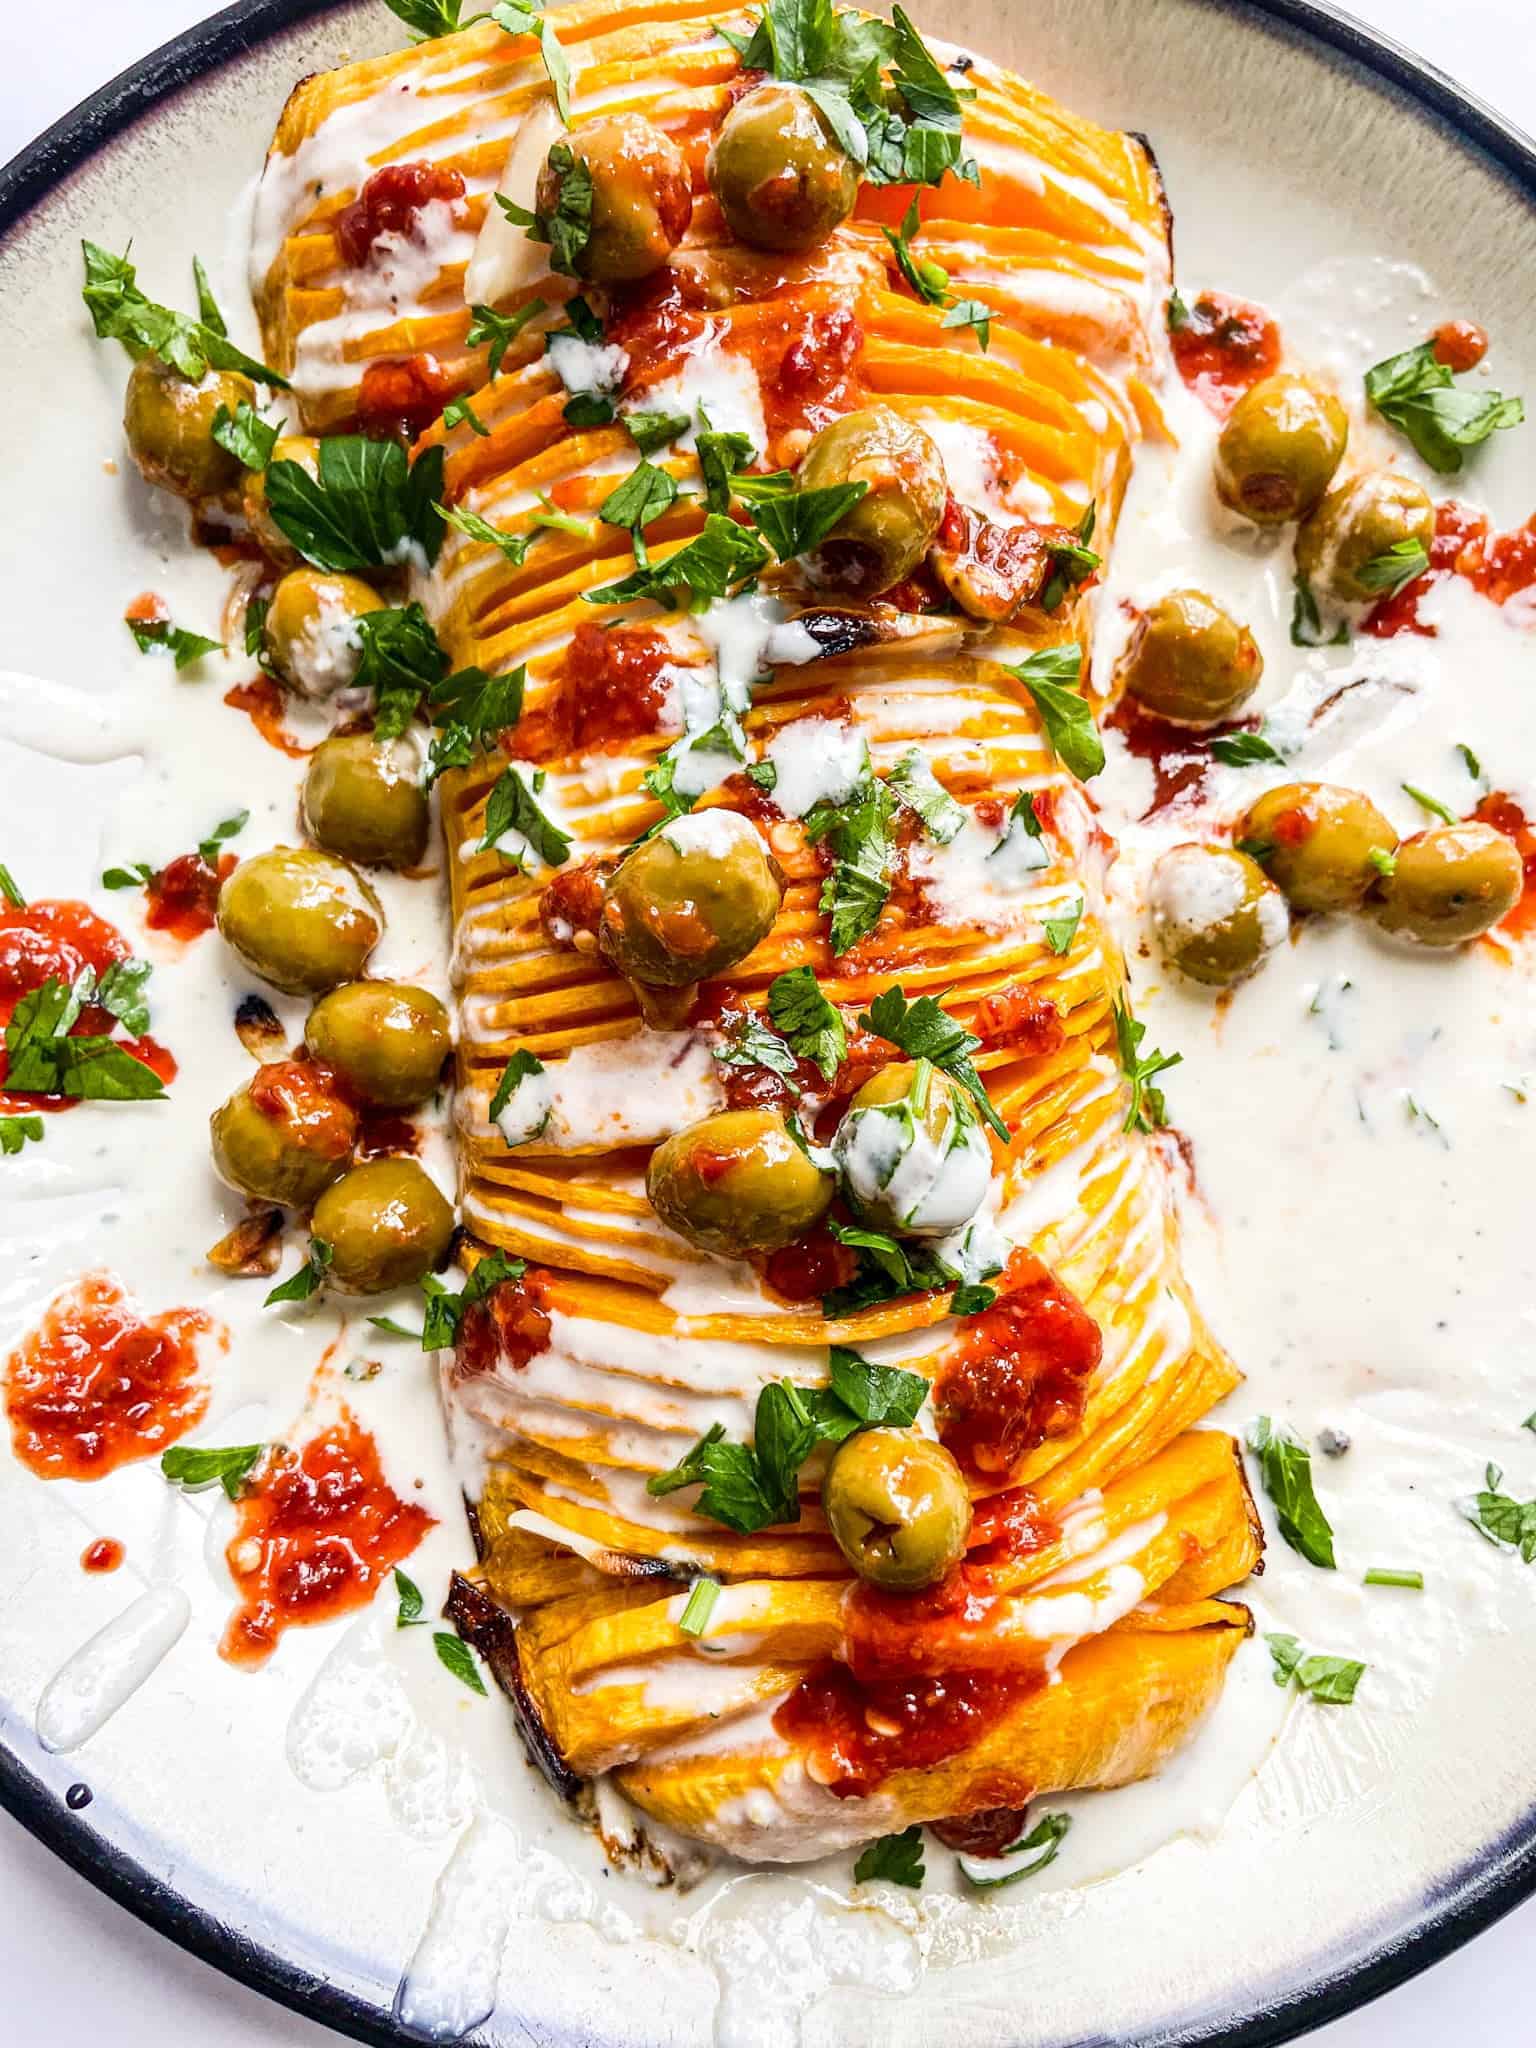 Hasselback Butternut Squash with Garlic Aioli and Moroccan Inspired Chili Olives